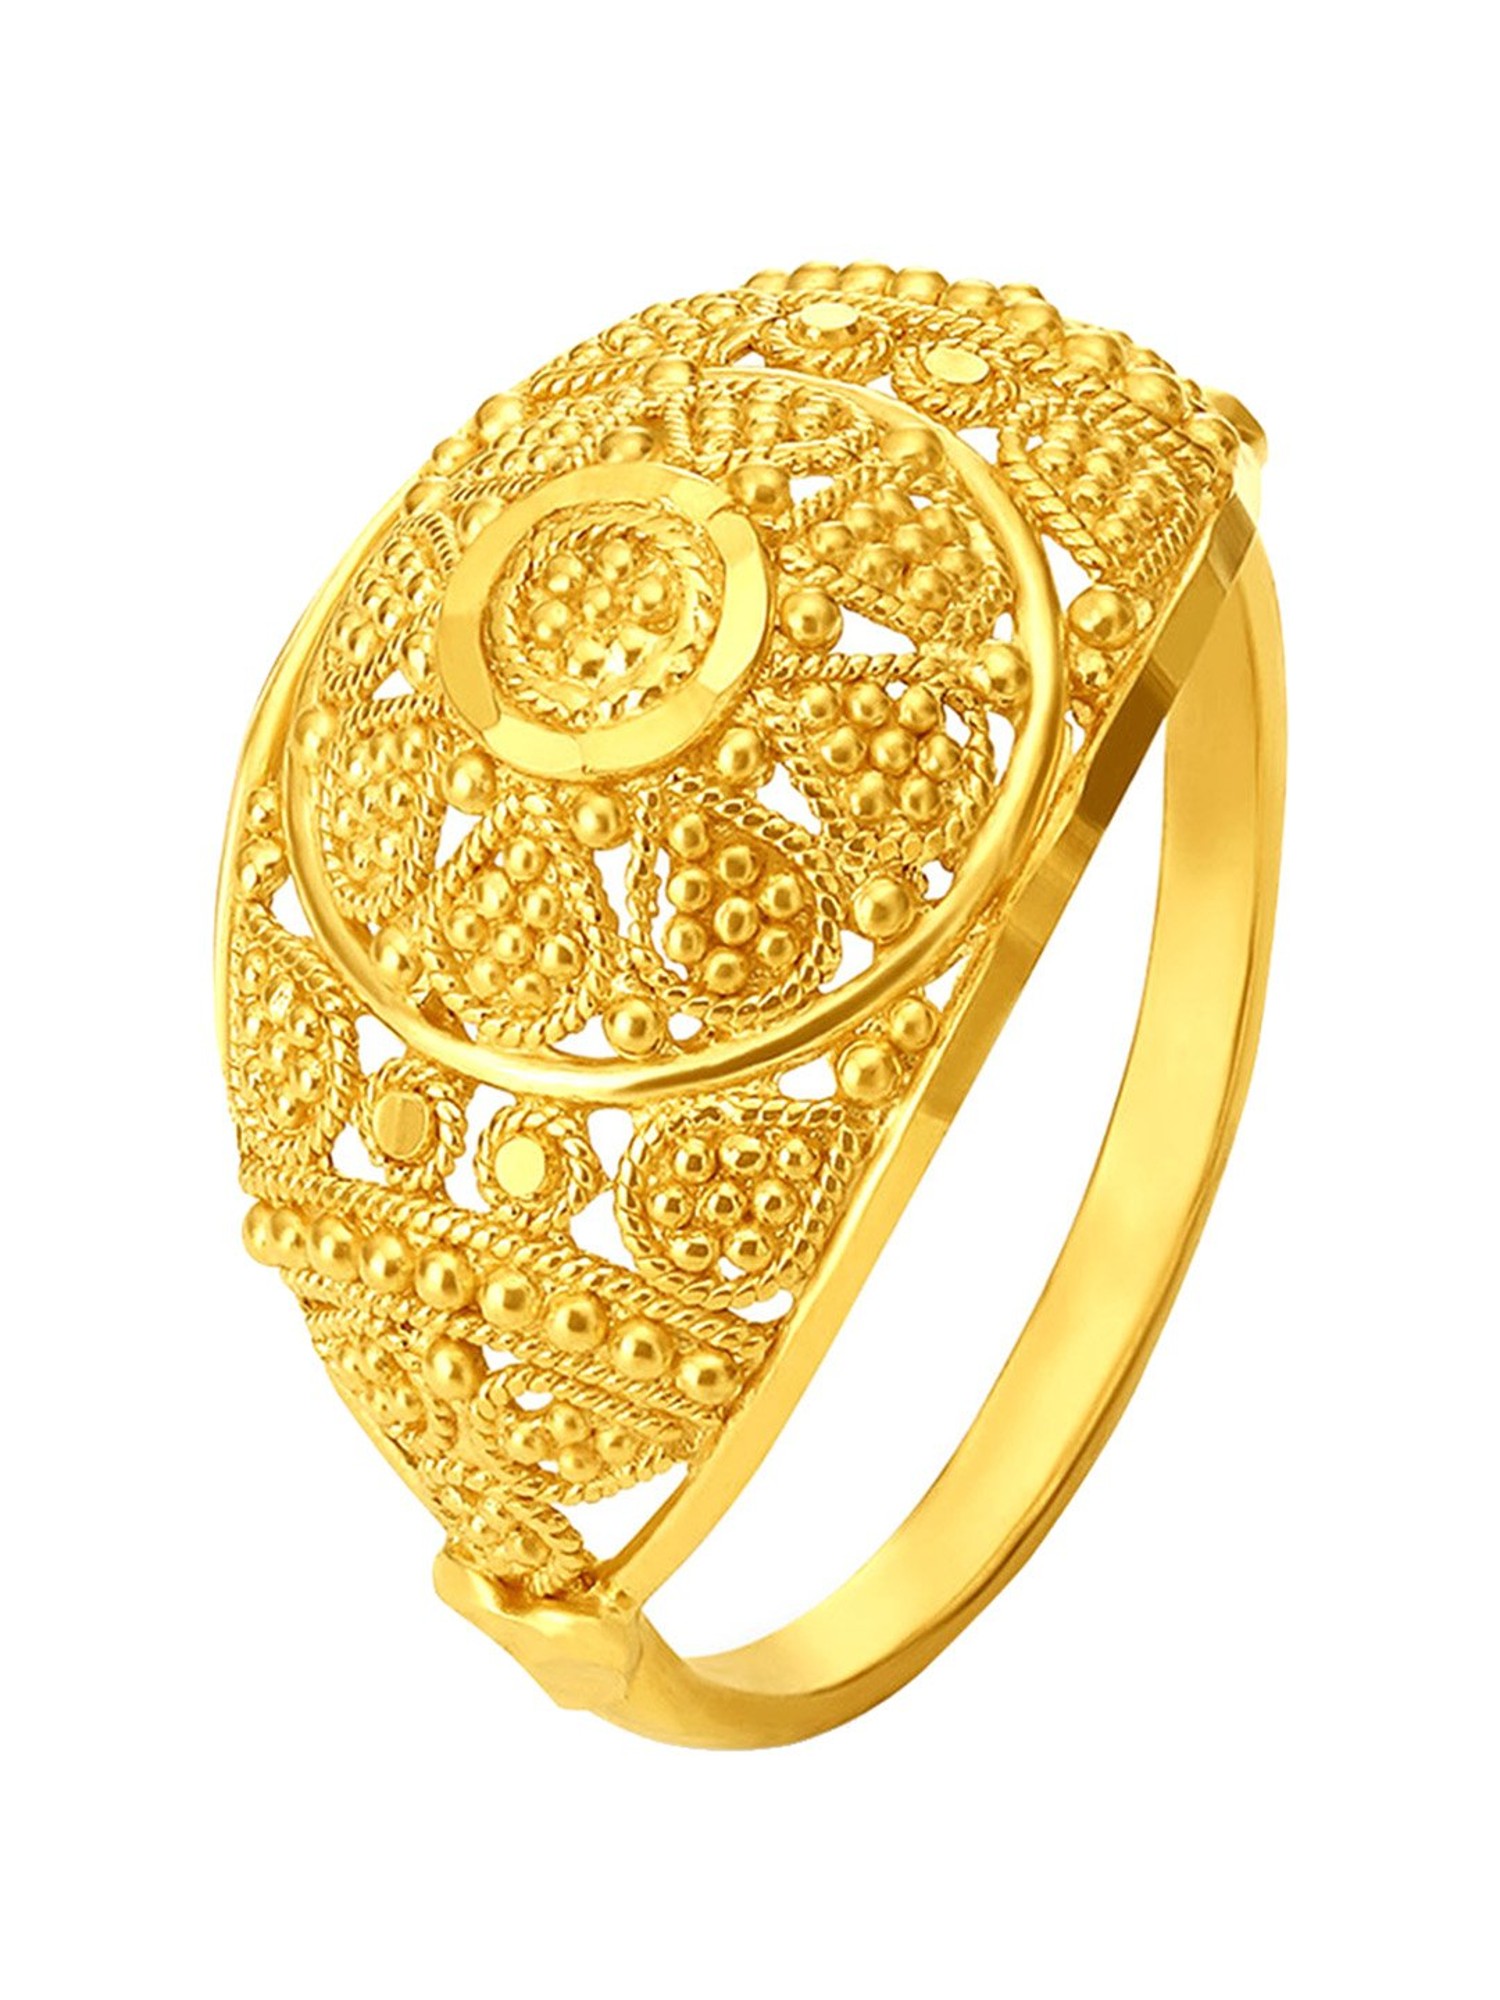 Don't miss first time on youtube tanishq gold couple ring name ring with  weight and price | tanishq - YouTube